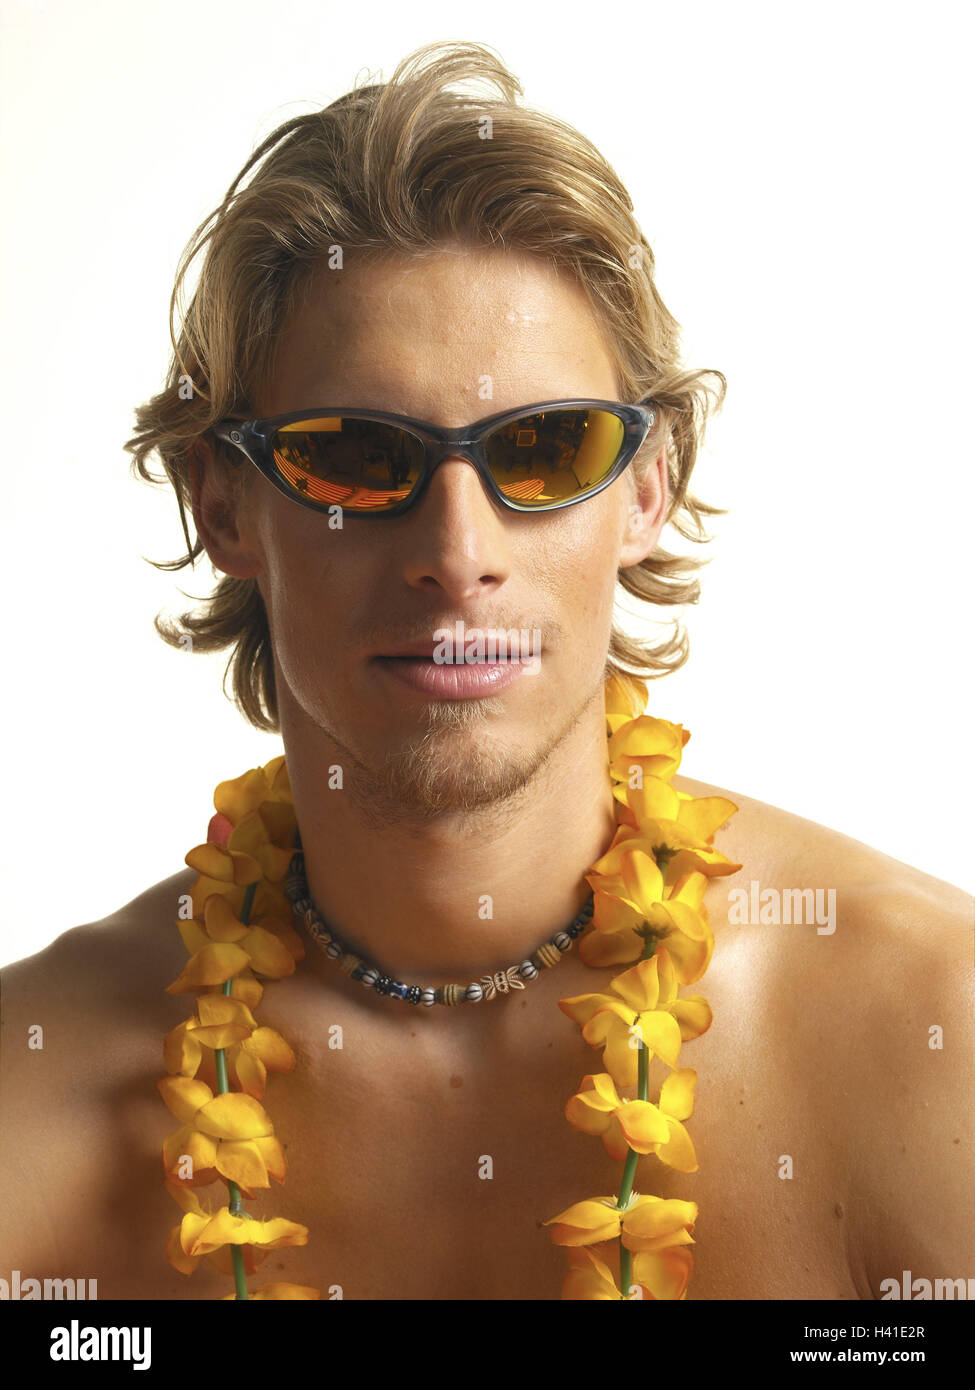 Man, young, sunglasses, floral wreath, free upper part of the body,  portrait, icon, vacation, summer vacation, leisure time, rest, blond,  necklace, glasses, sportily, athletically, cool, careless, confidently,  summery, flower rim artificially, Lei,